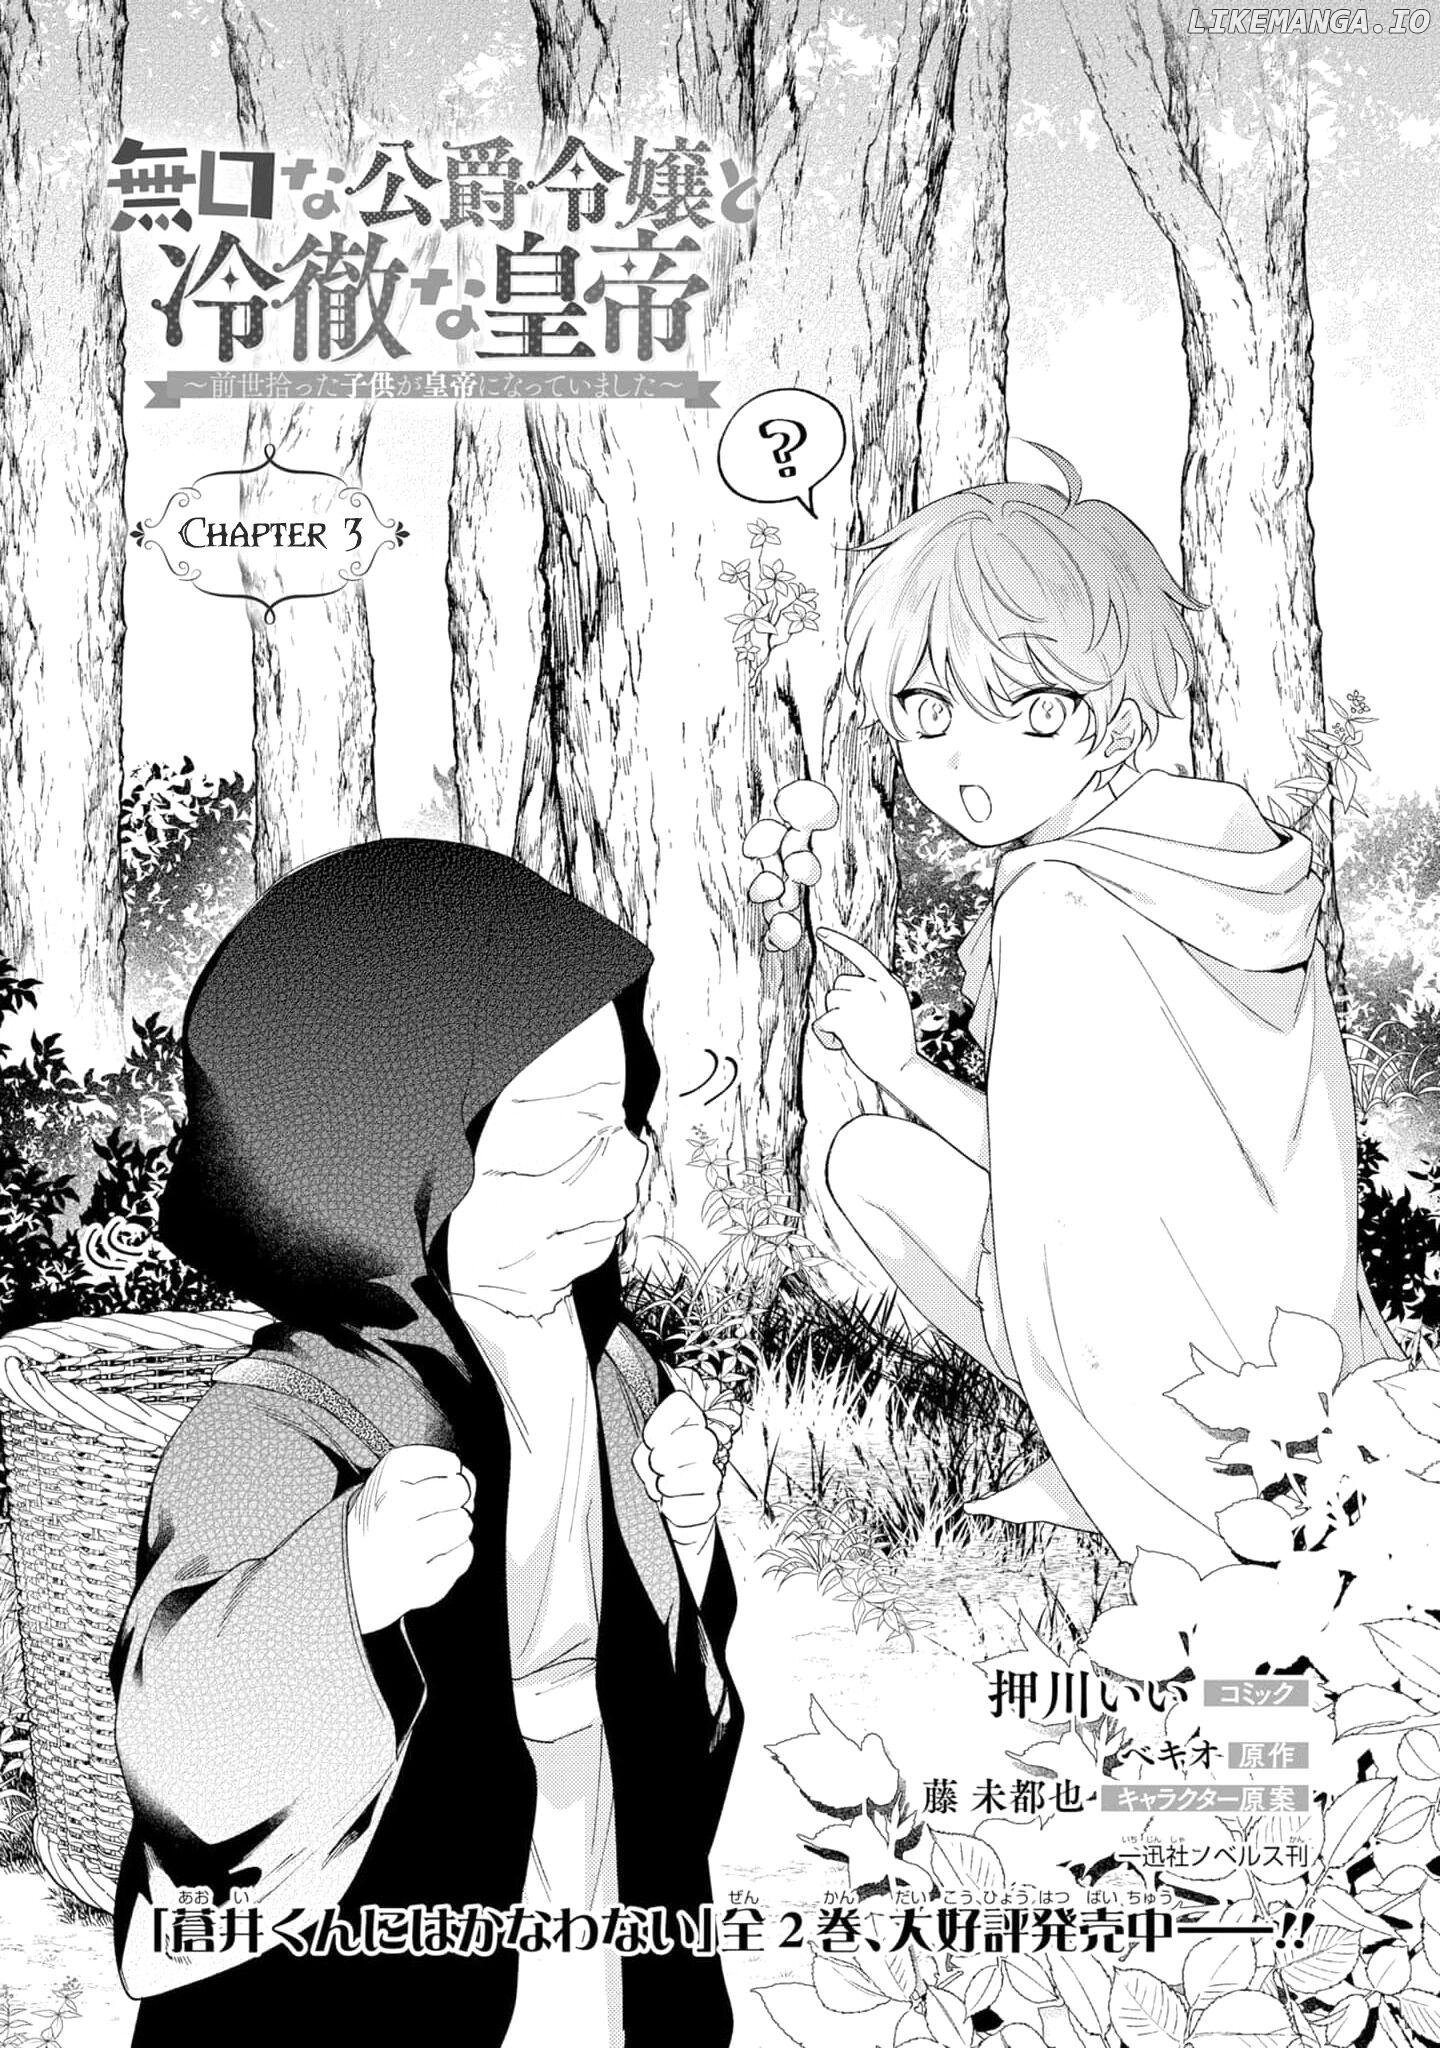 The Silent Daughter of a Duke and the Cold Emperor ~ The Child I Found in My Past Life Became the Emperor ~ Chapter 3 - page 4